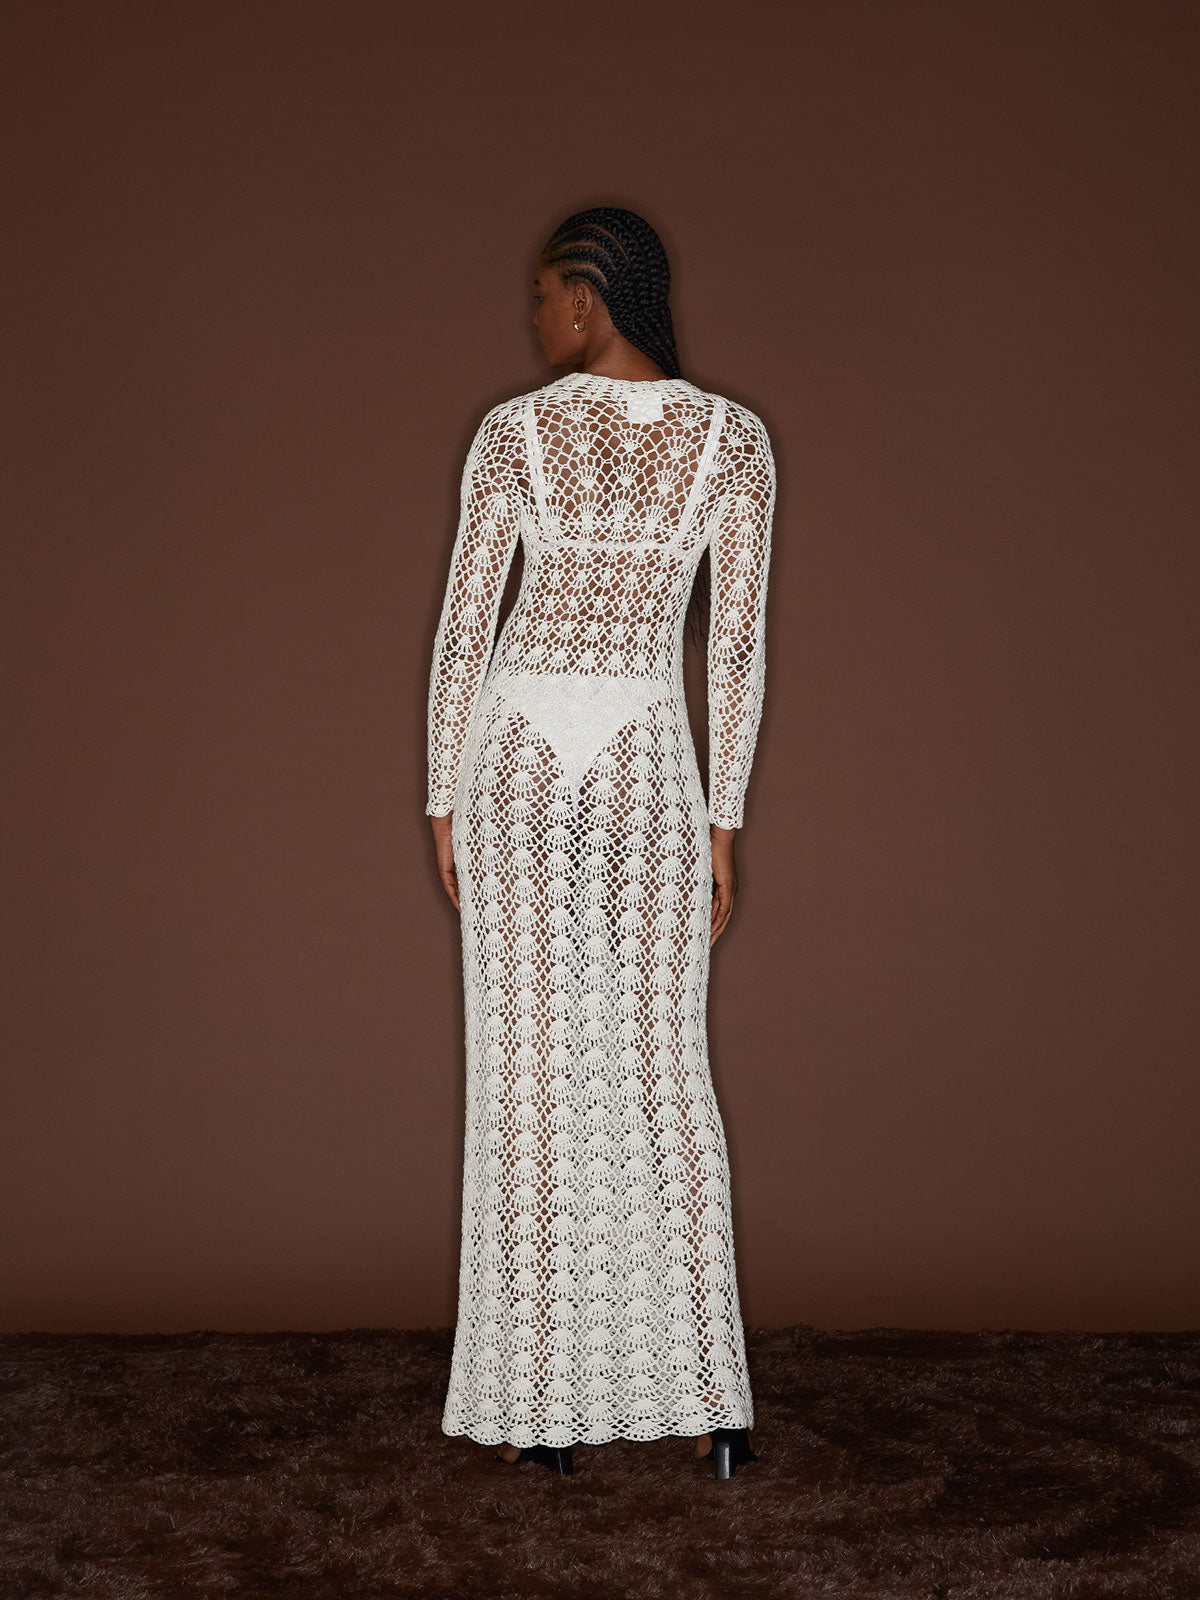 Back view of a female figure wearing the White 09 Crochet Dress